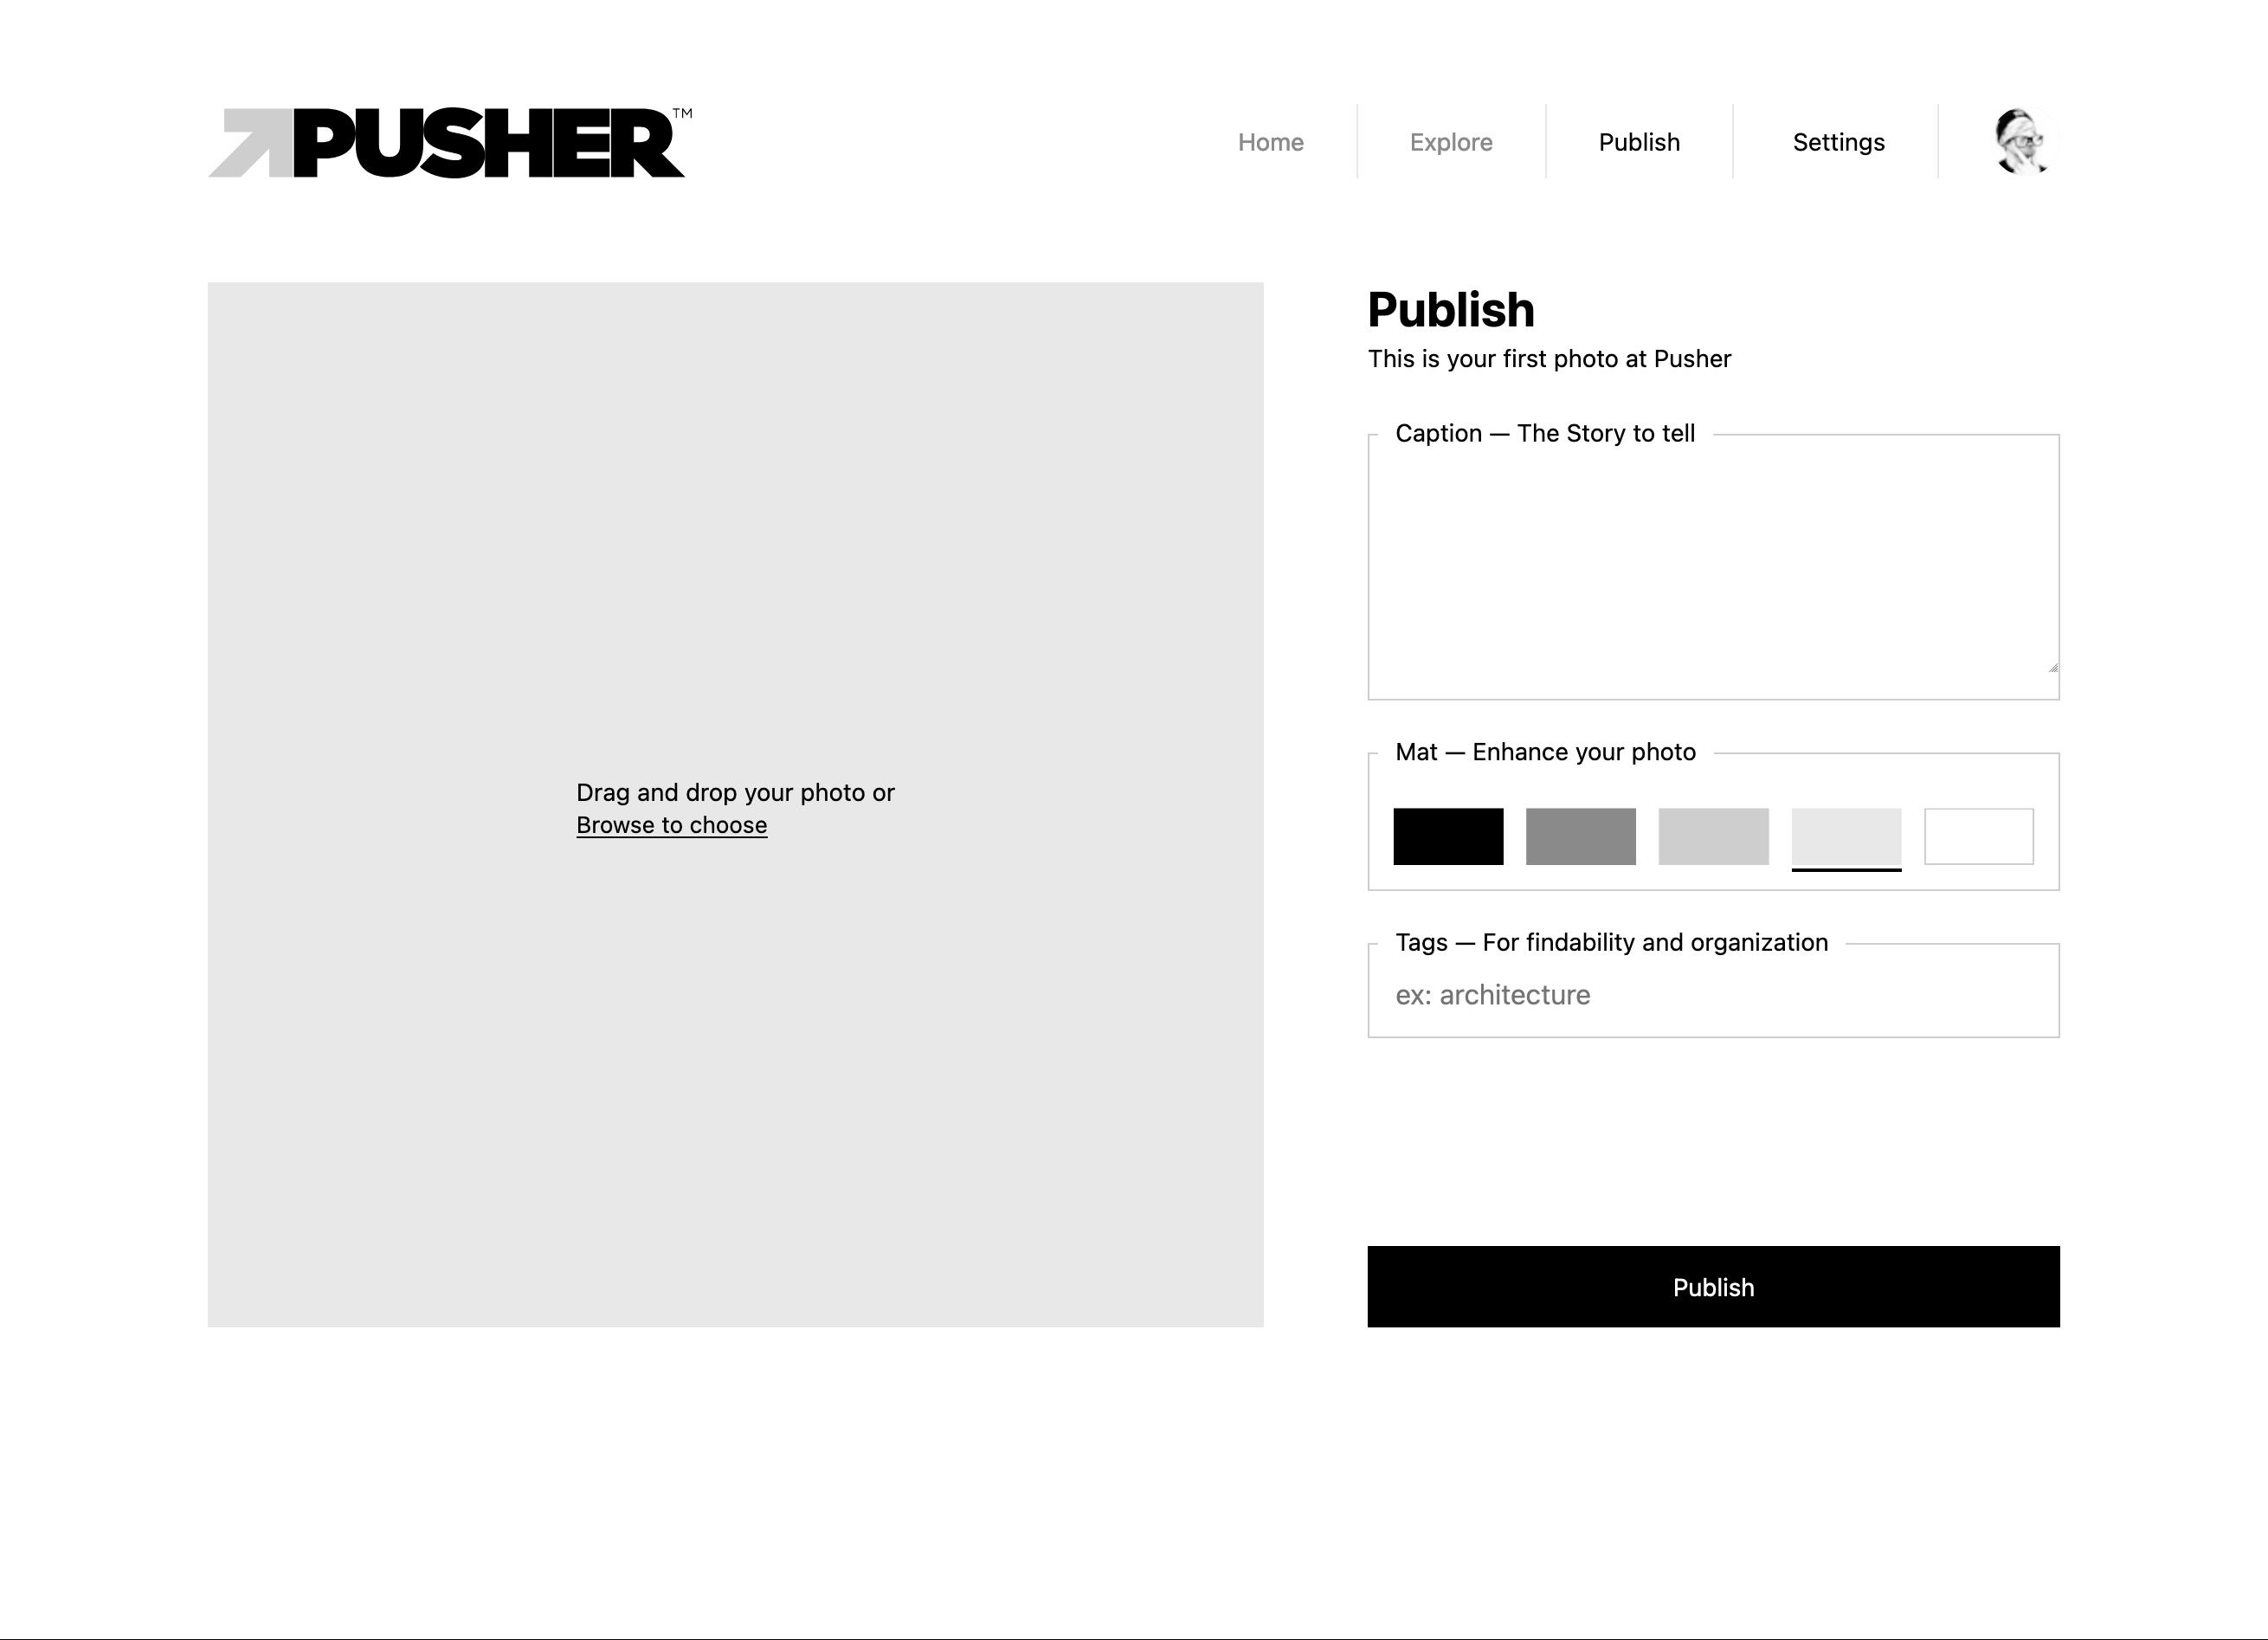 Publish your first photo at Pusher